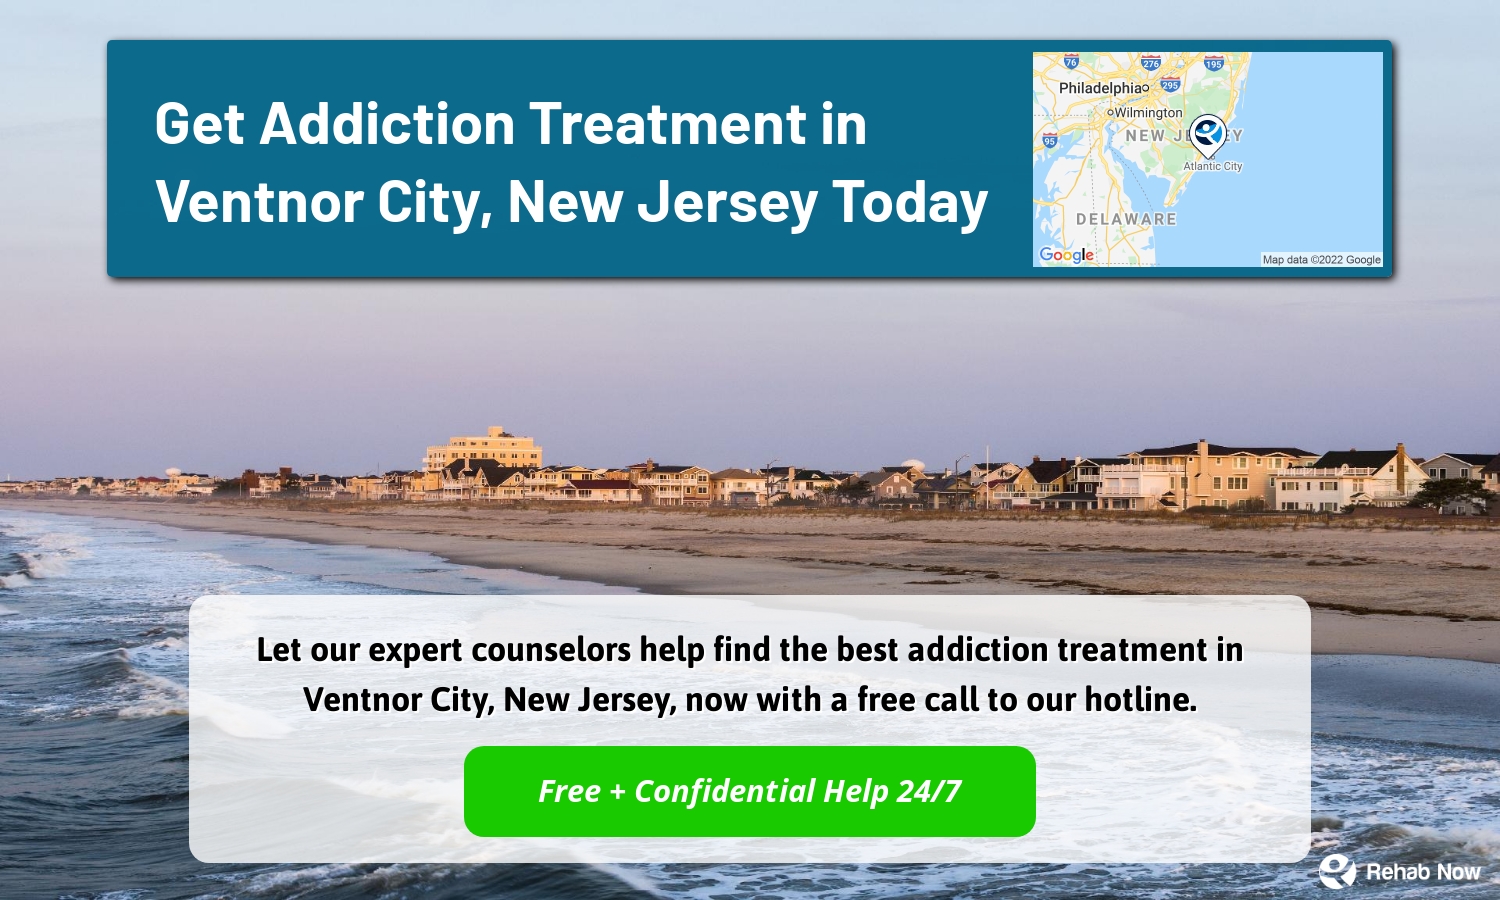 Let our expert counselors help find the best addiction treatment in Ventnor City, New Jersey, now with a free call to our hotline.